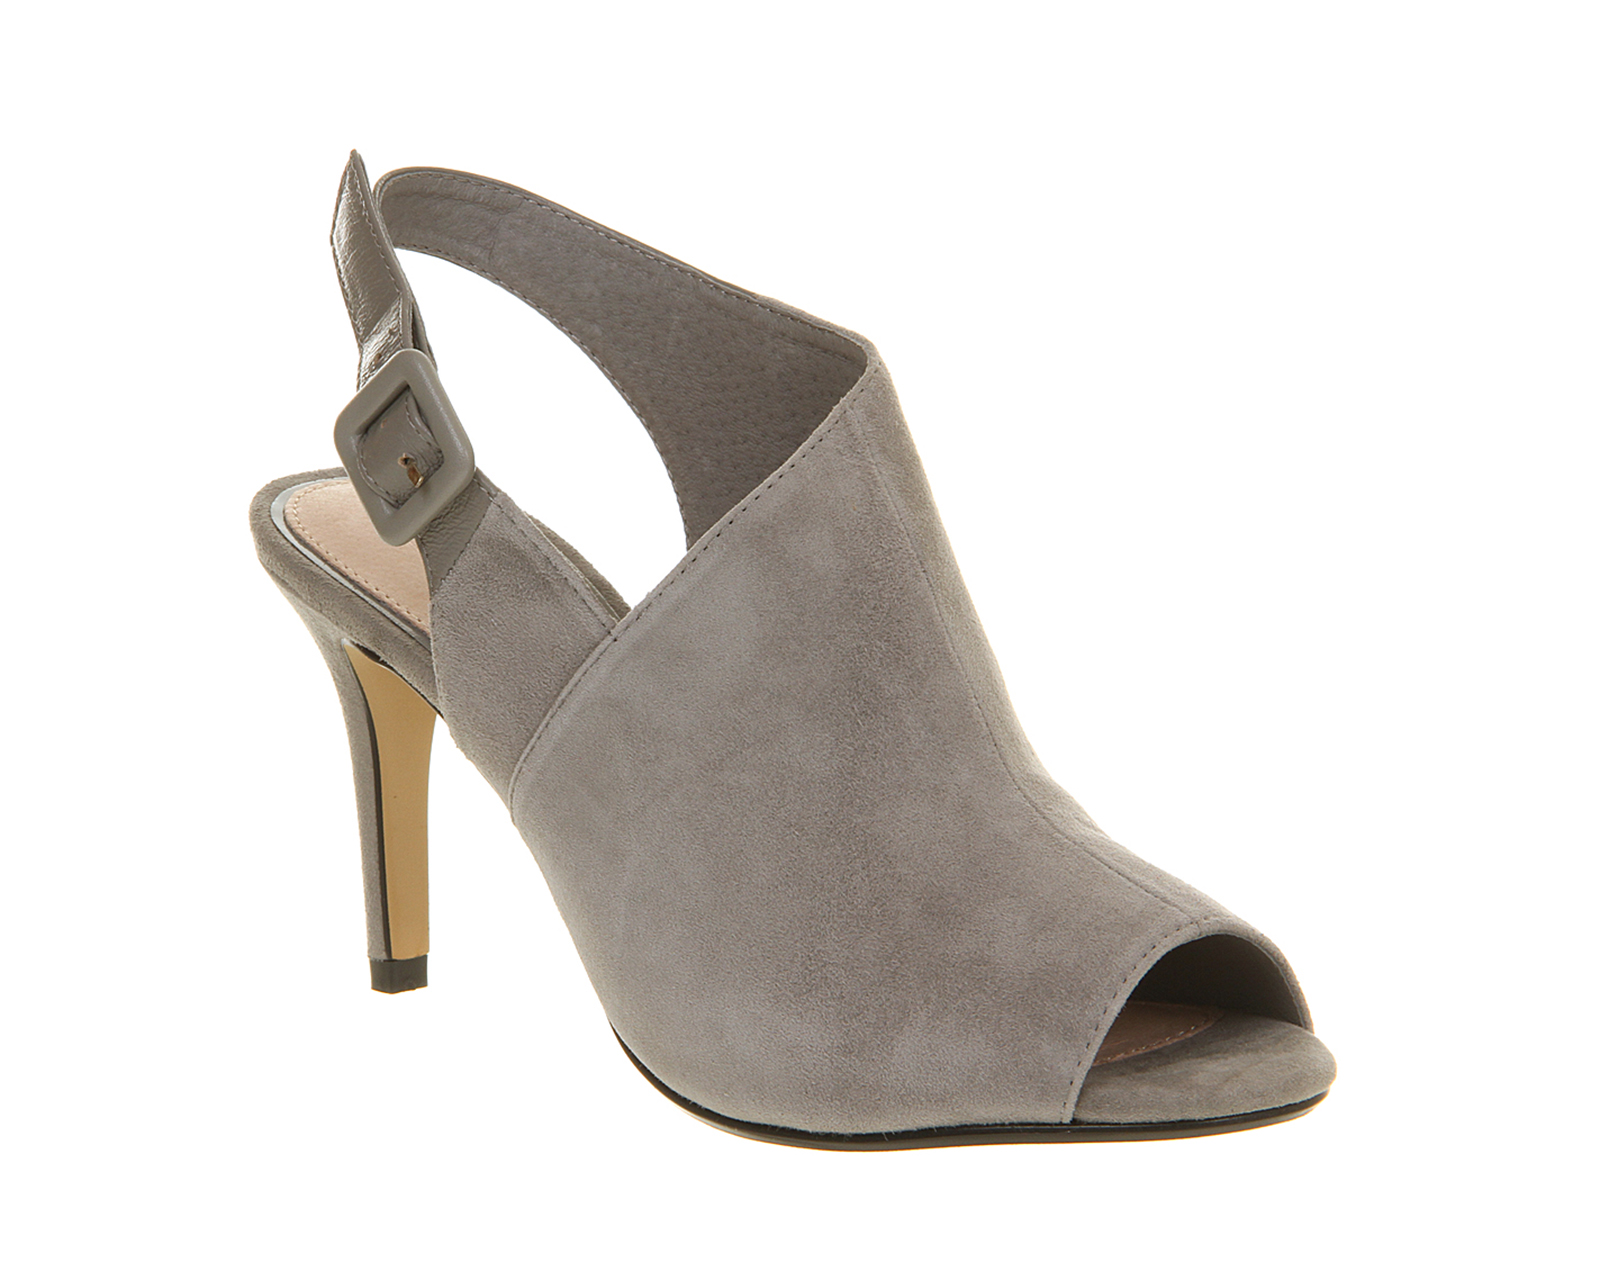 OFFICEGauntlet Cut Out Shoe bootsGrey Suede